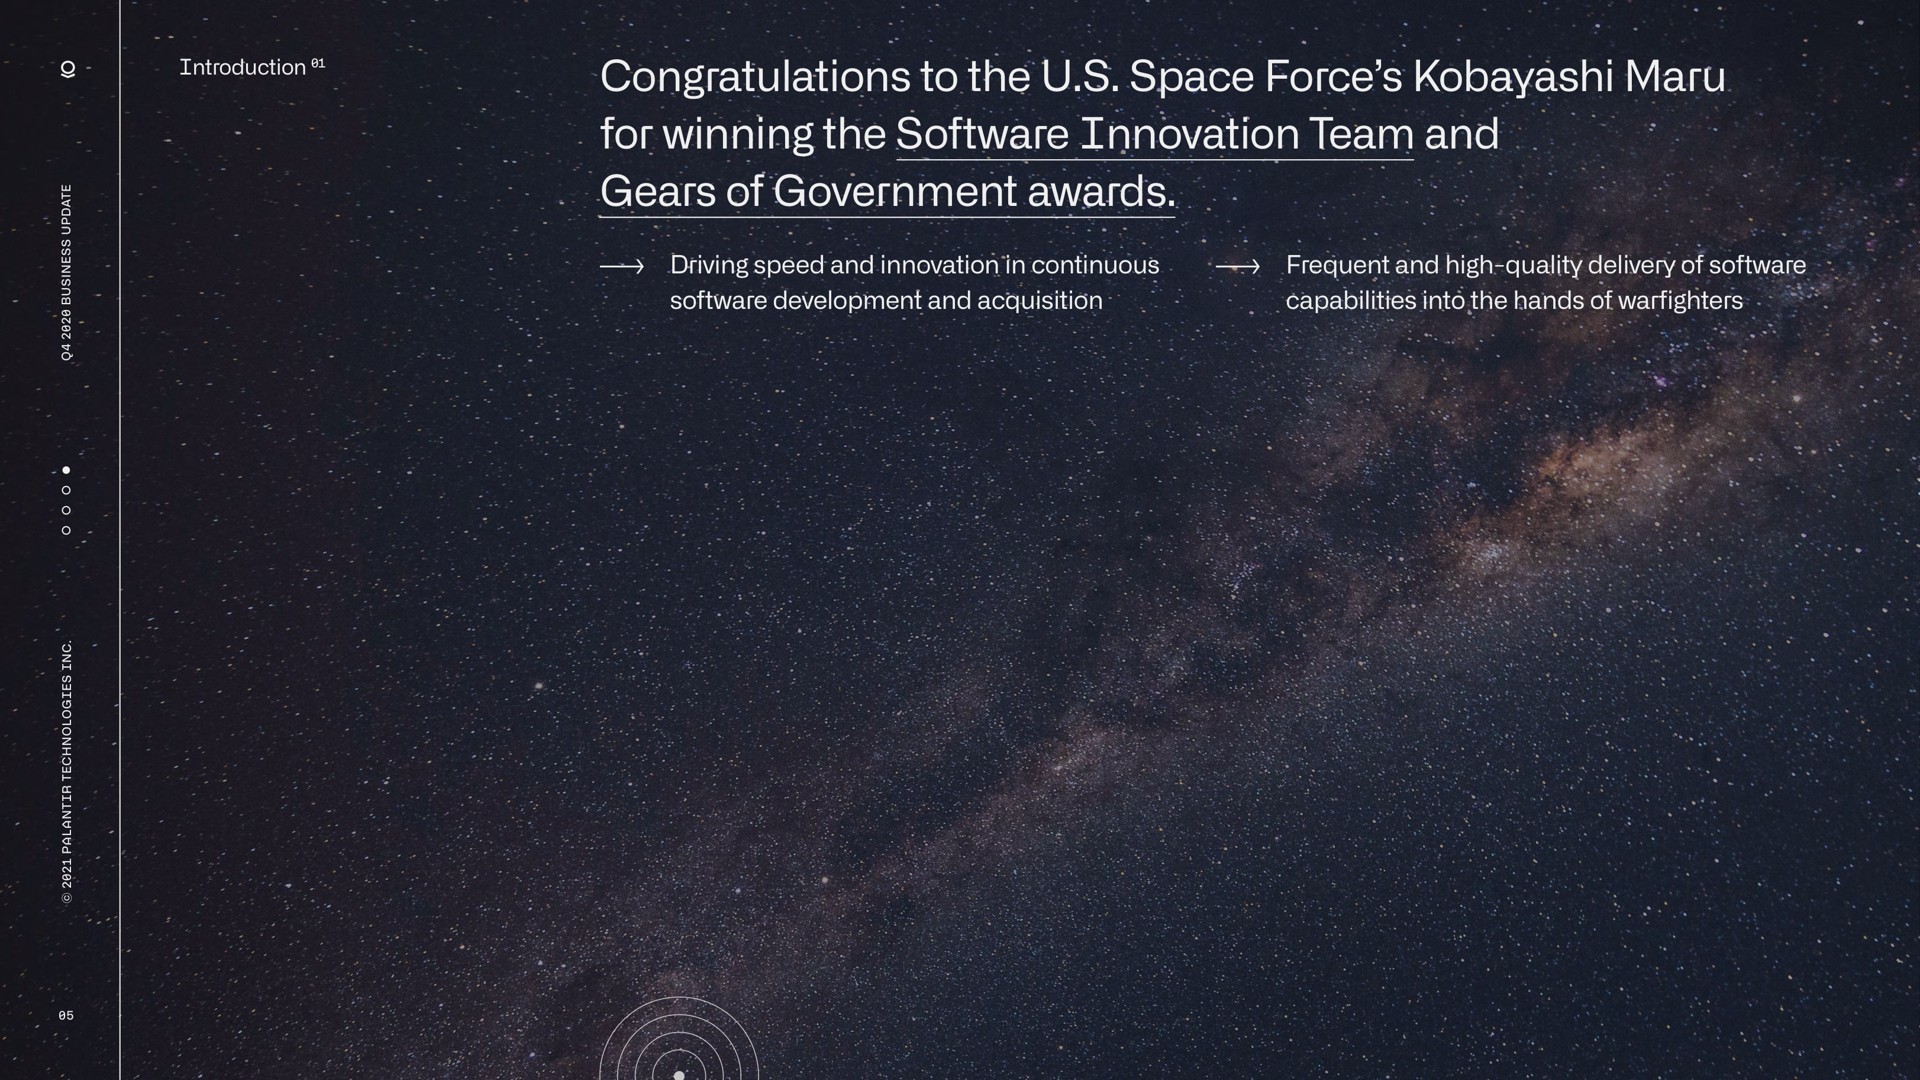 congratulations to the space force maru for winning the innovation team and gears of government awards moneys | Palantir